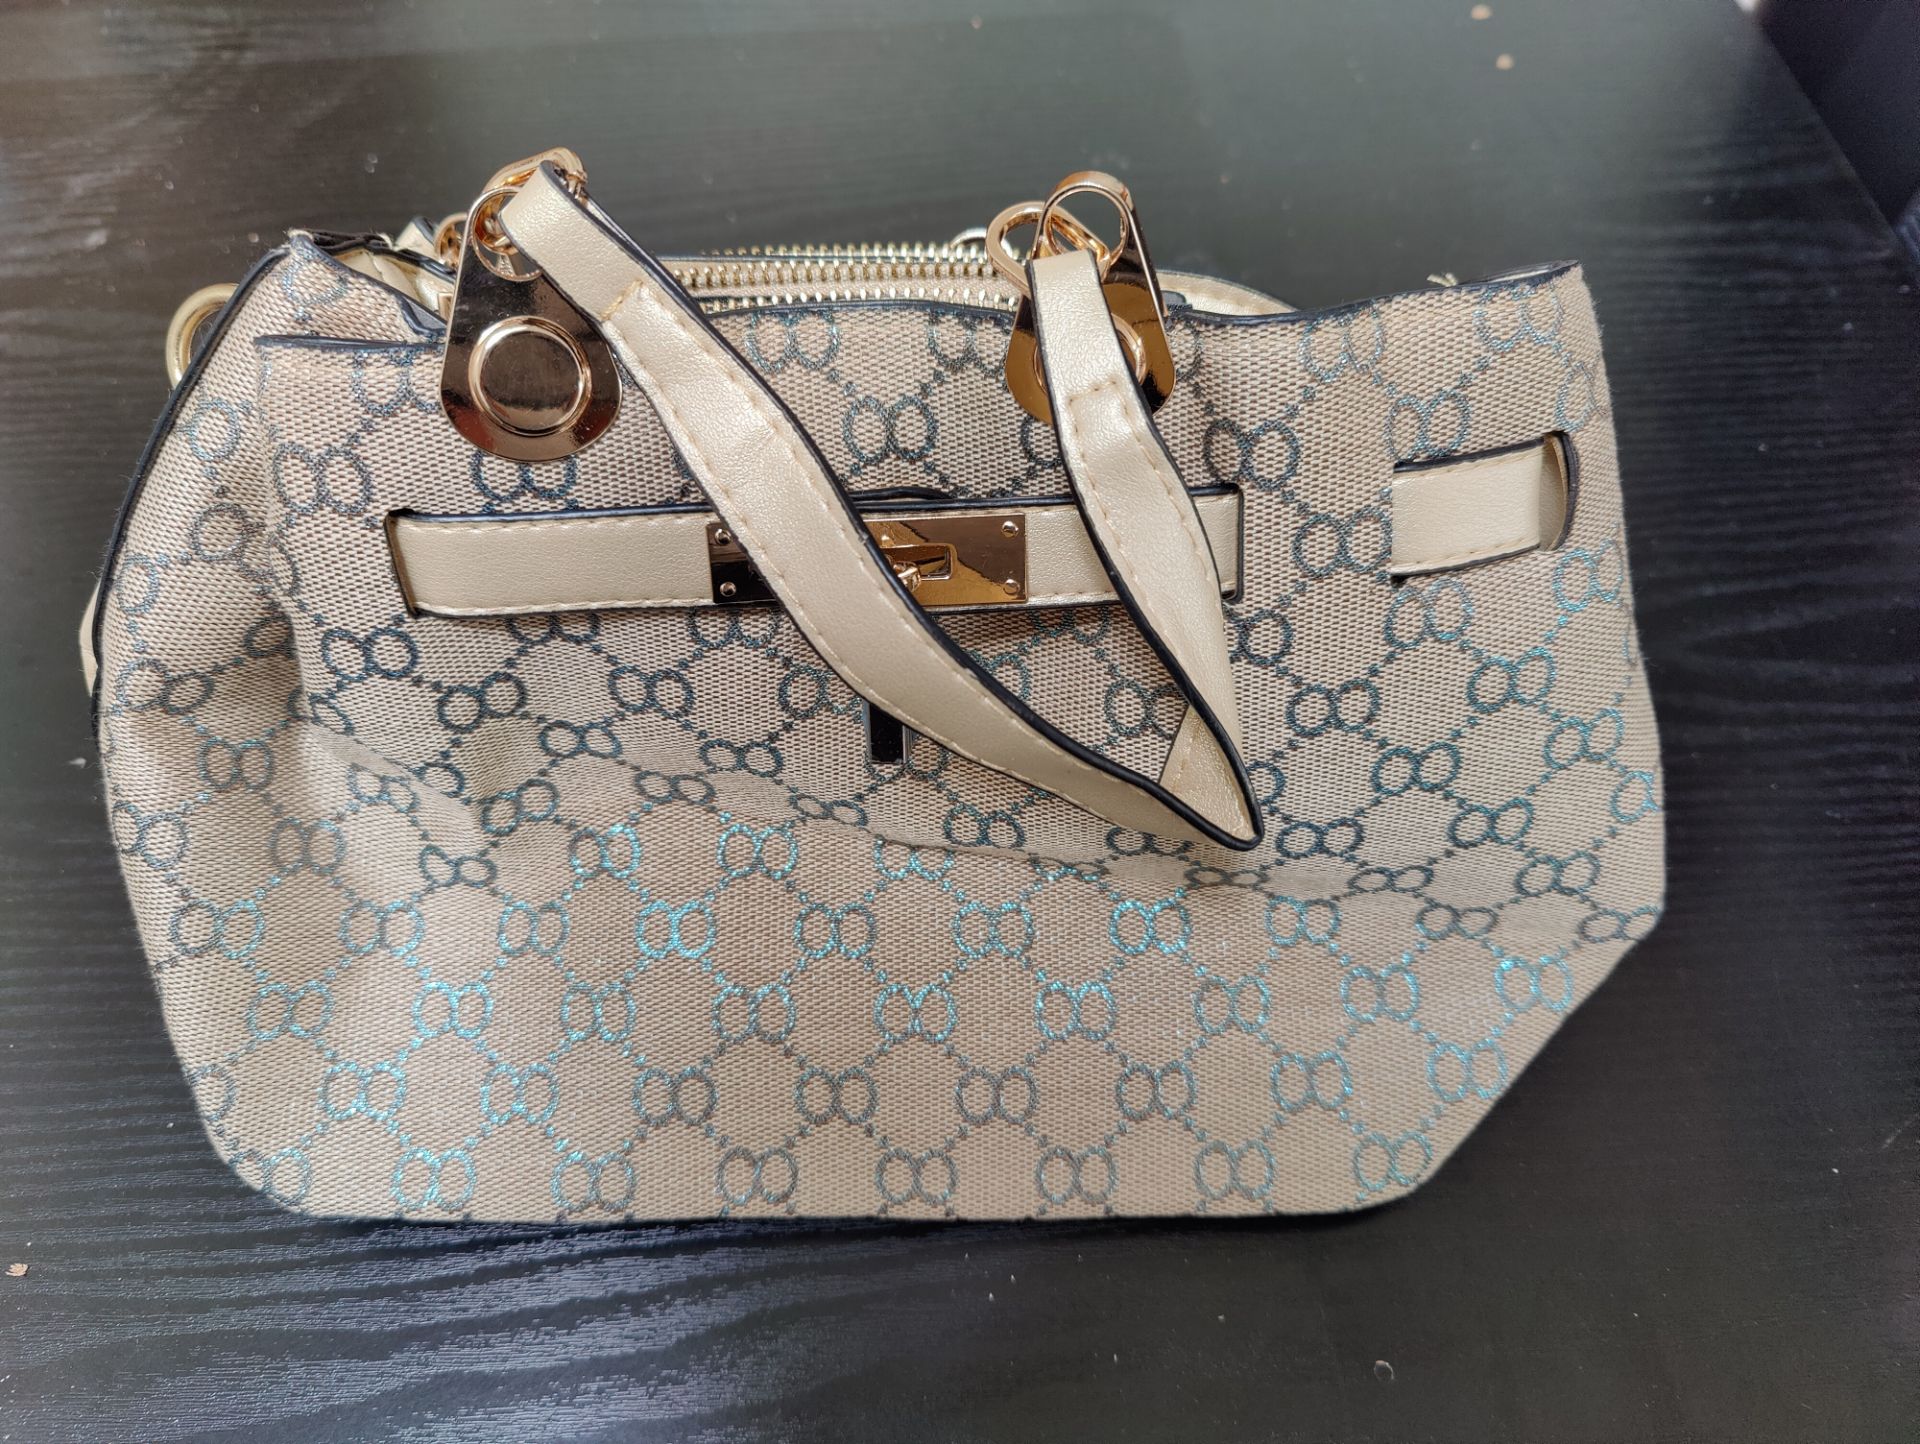 Clearance Joblot 6 x Ladies Hand Bag - Image 2 of 2